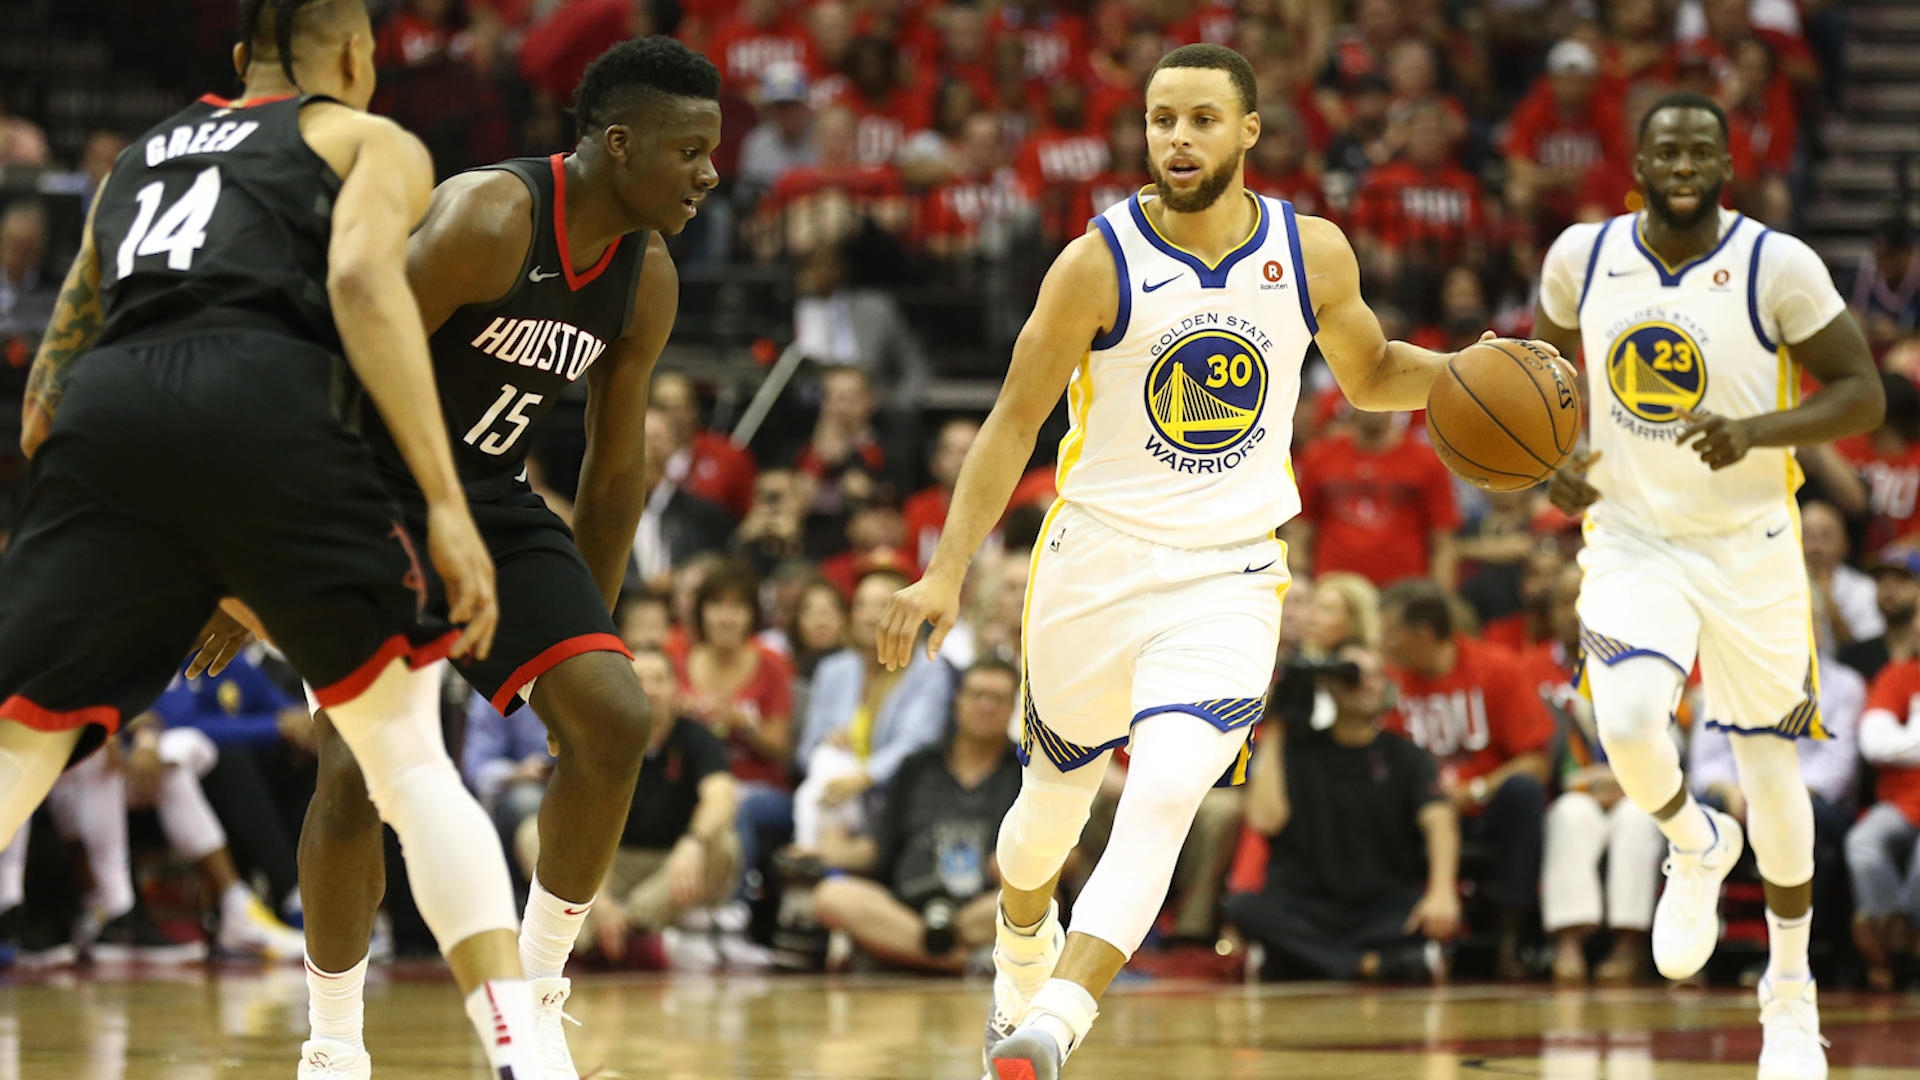 Warriors vs. Rockets: Stephen Curry goes cold as Houston regains form in Game 2 blowout win